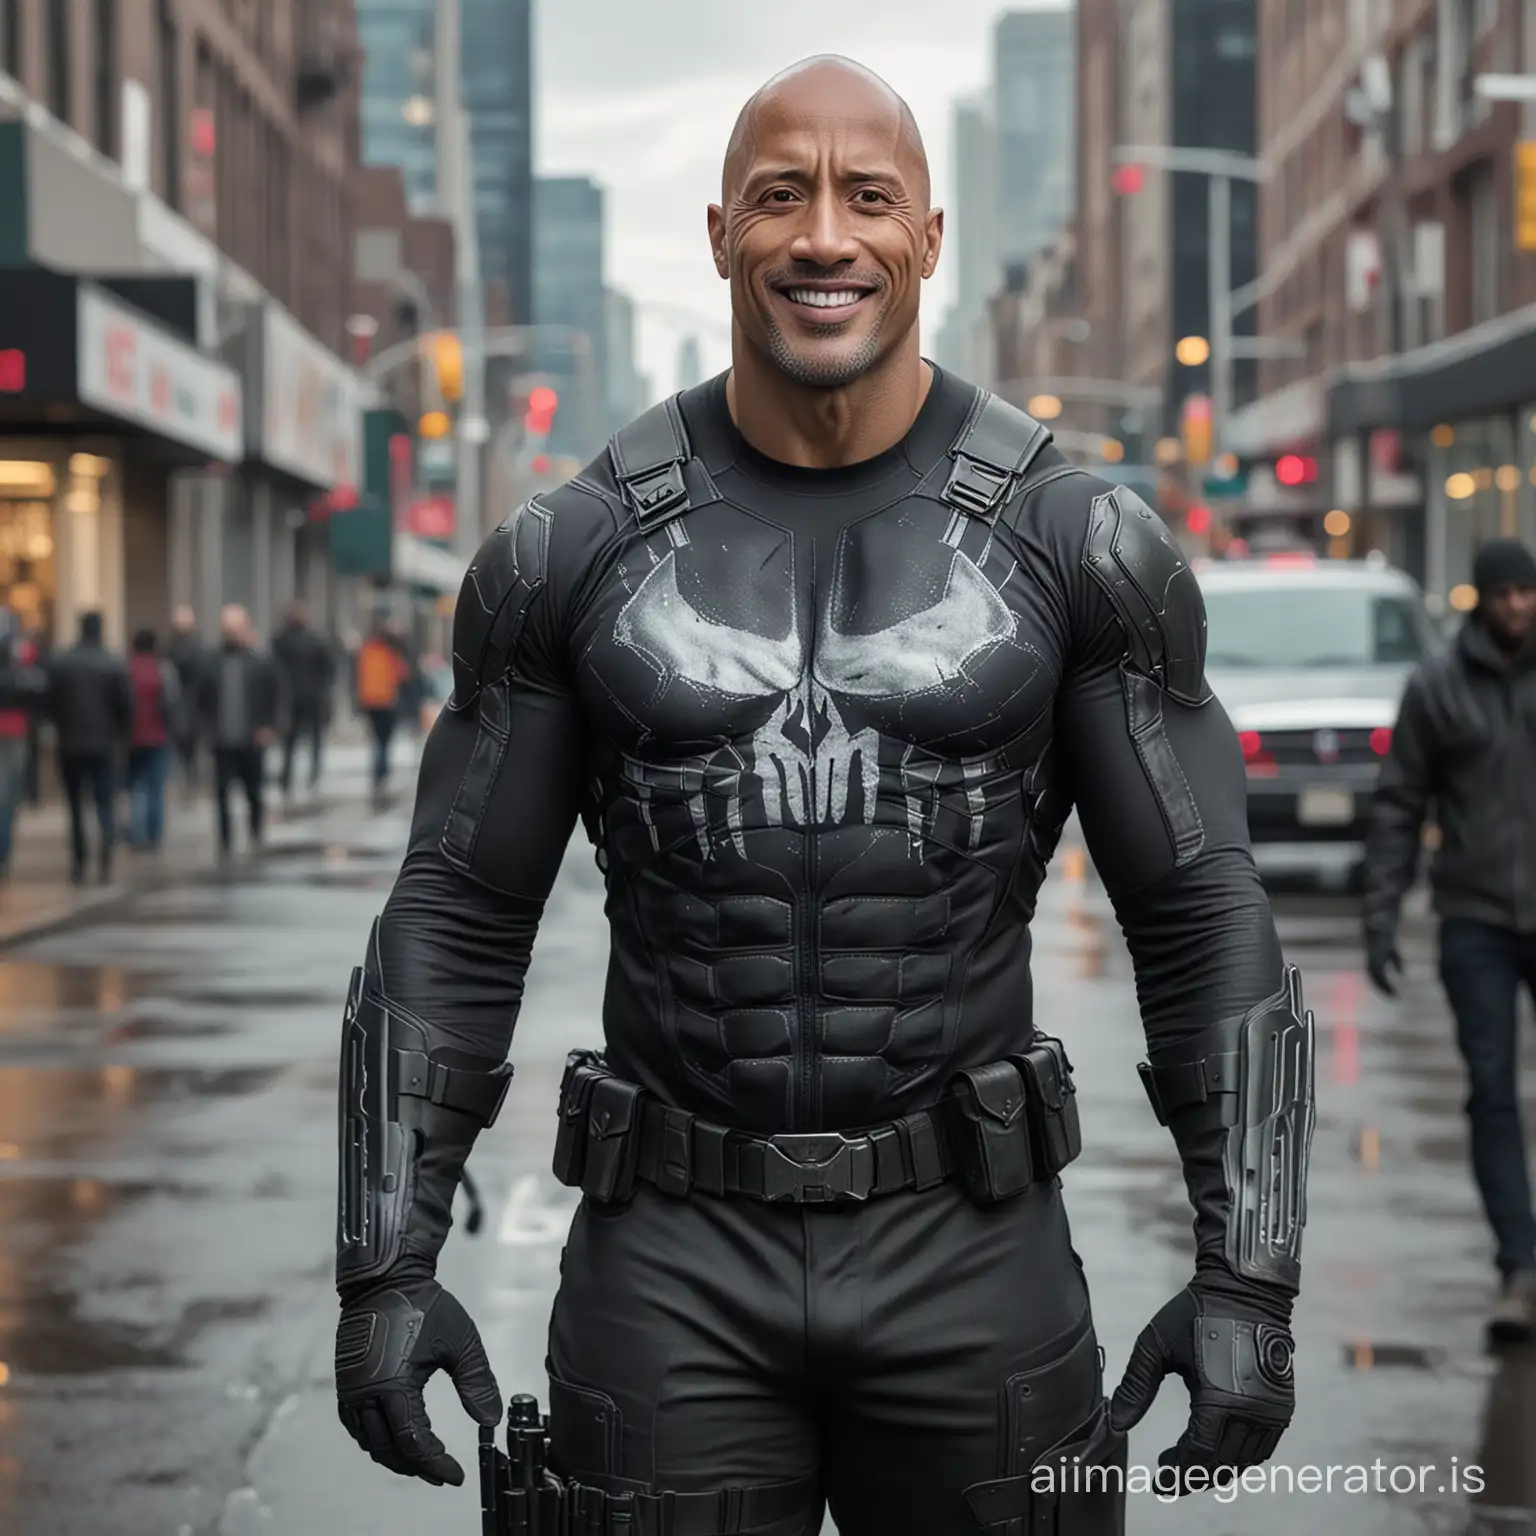 Dwayne-Johnson-in-Punisher-Suit-Smiling-on-Blurry-Canadian-Street